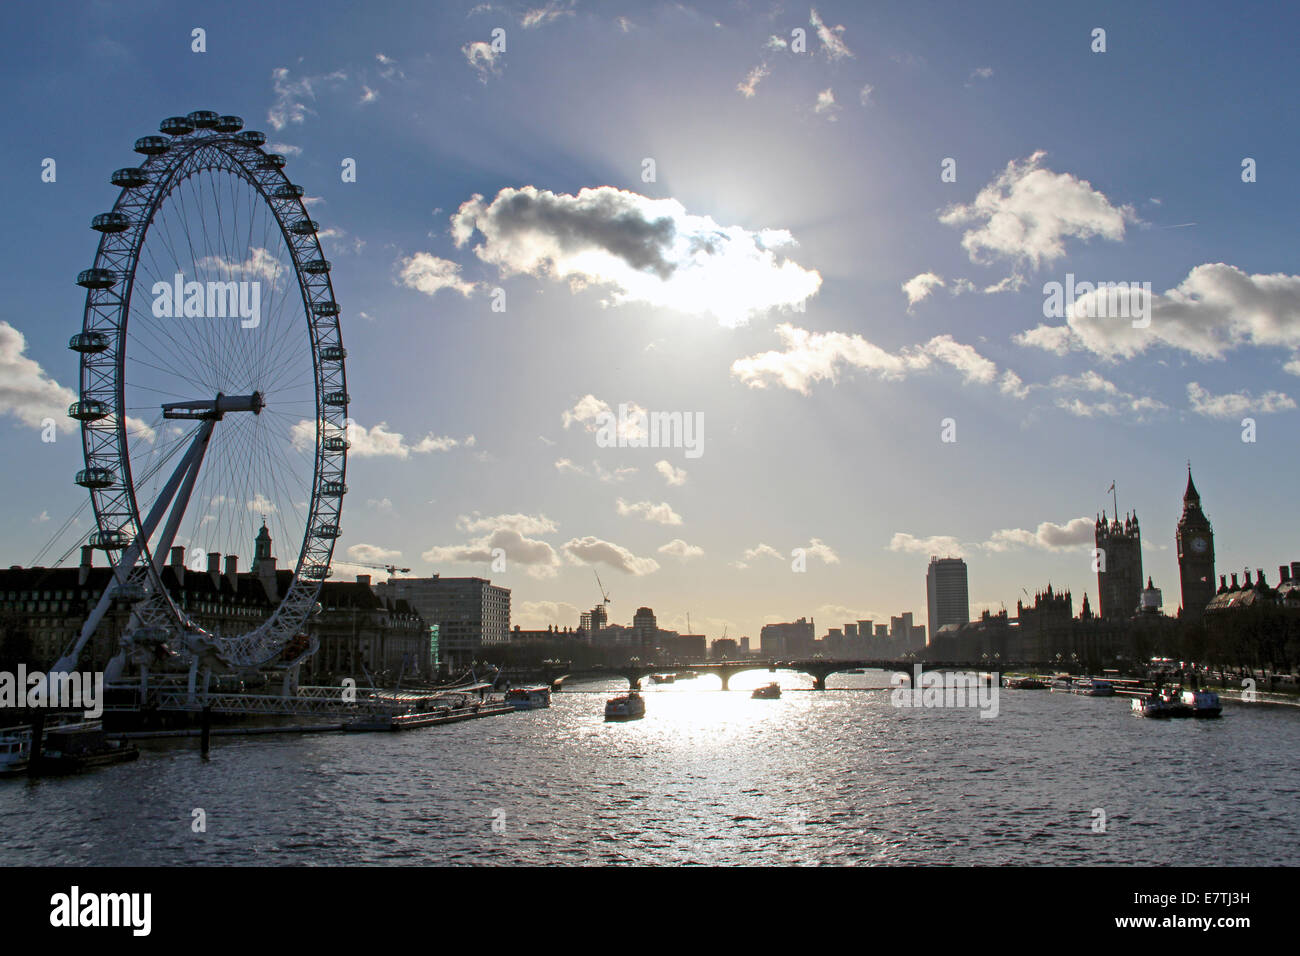 England: London Eye, Palace of Westminster and Big Ben (left to right). Photo from 11. January 2014. Stock Photo